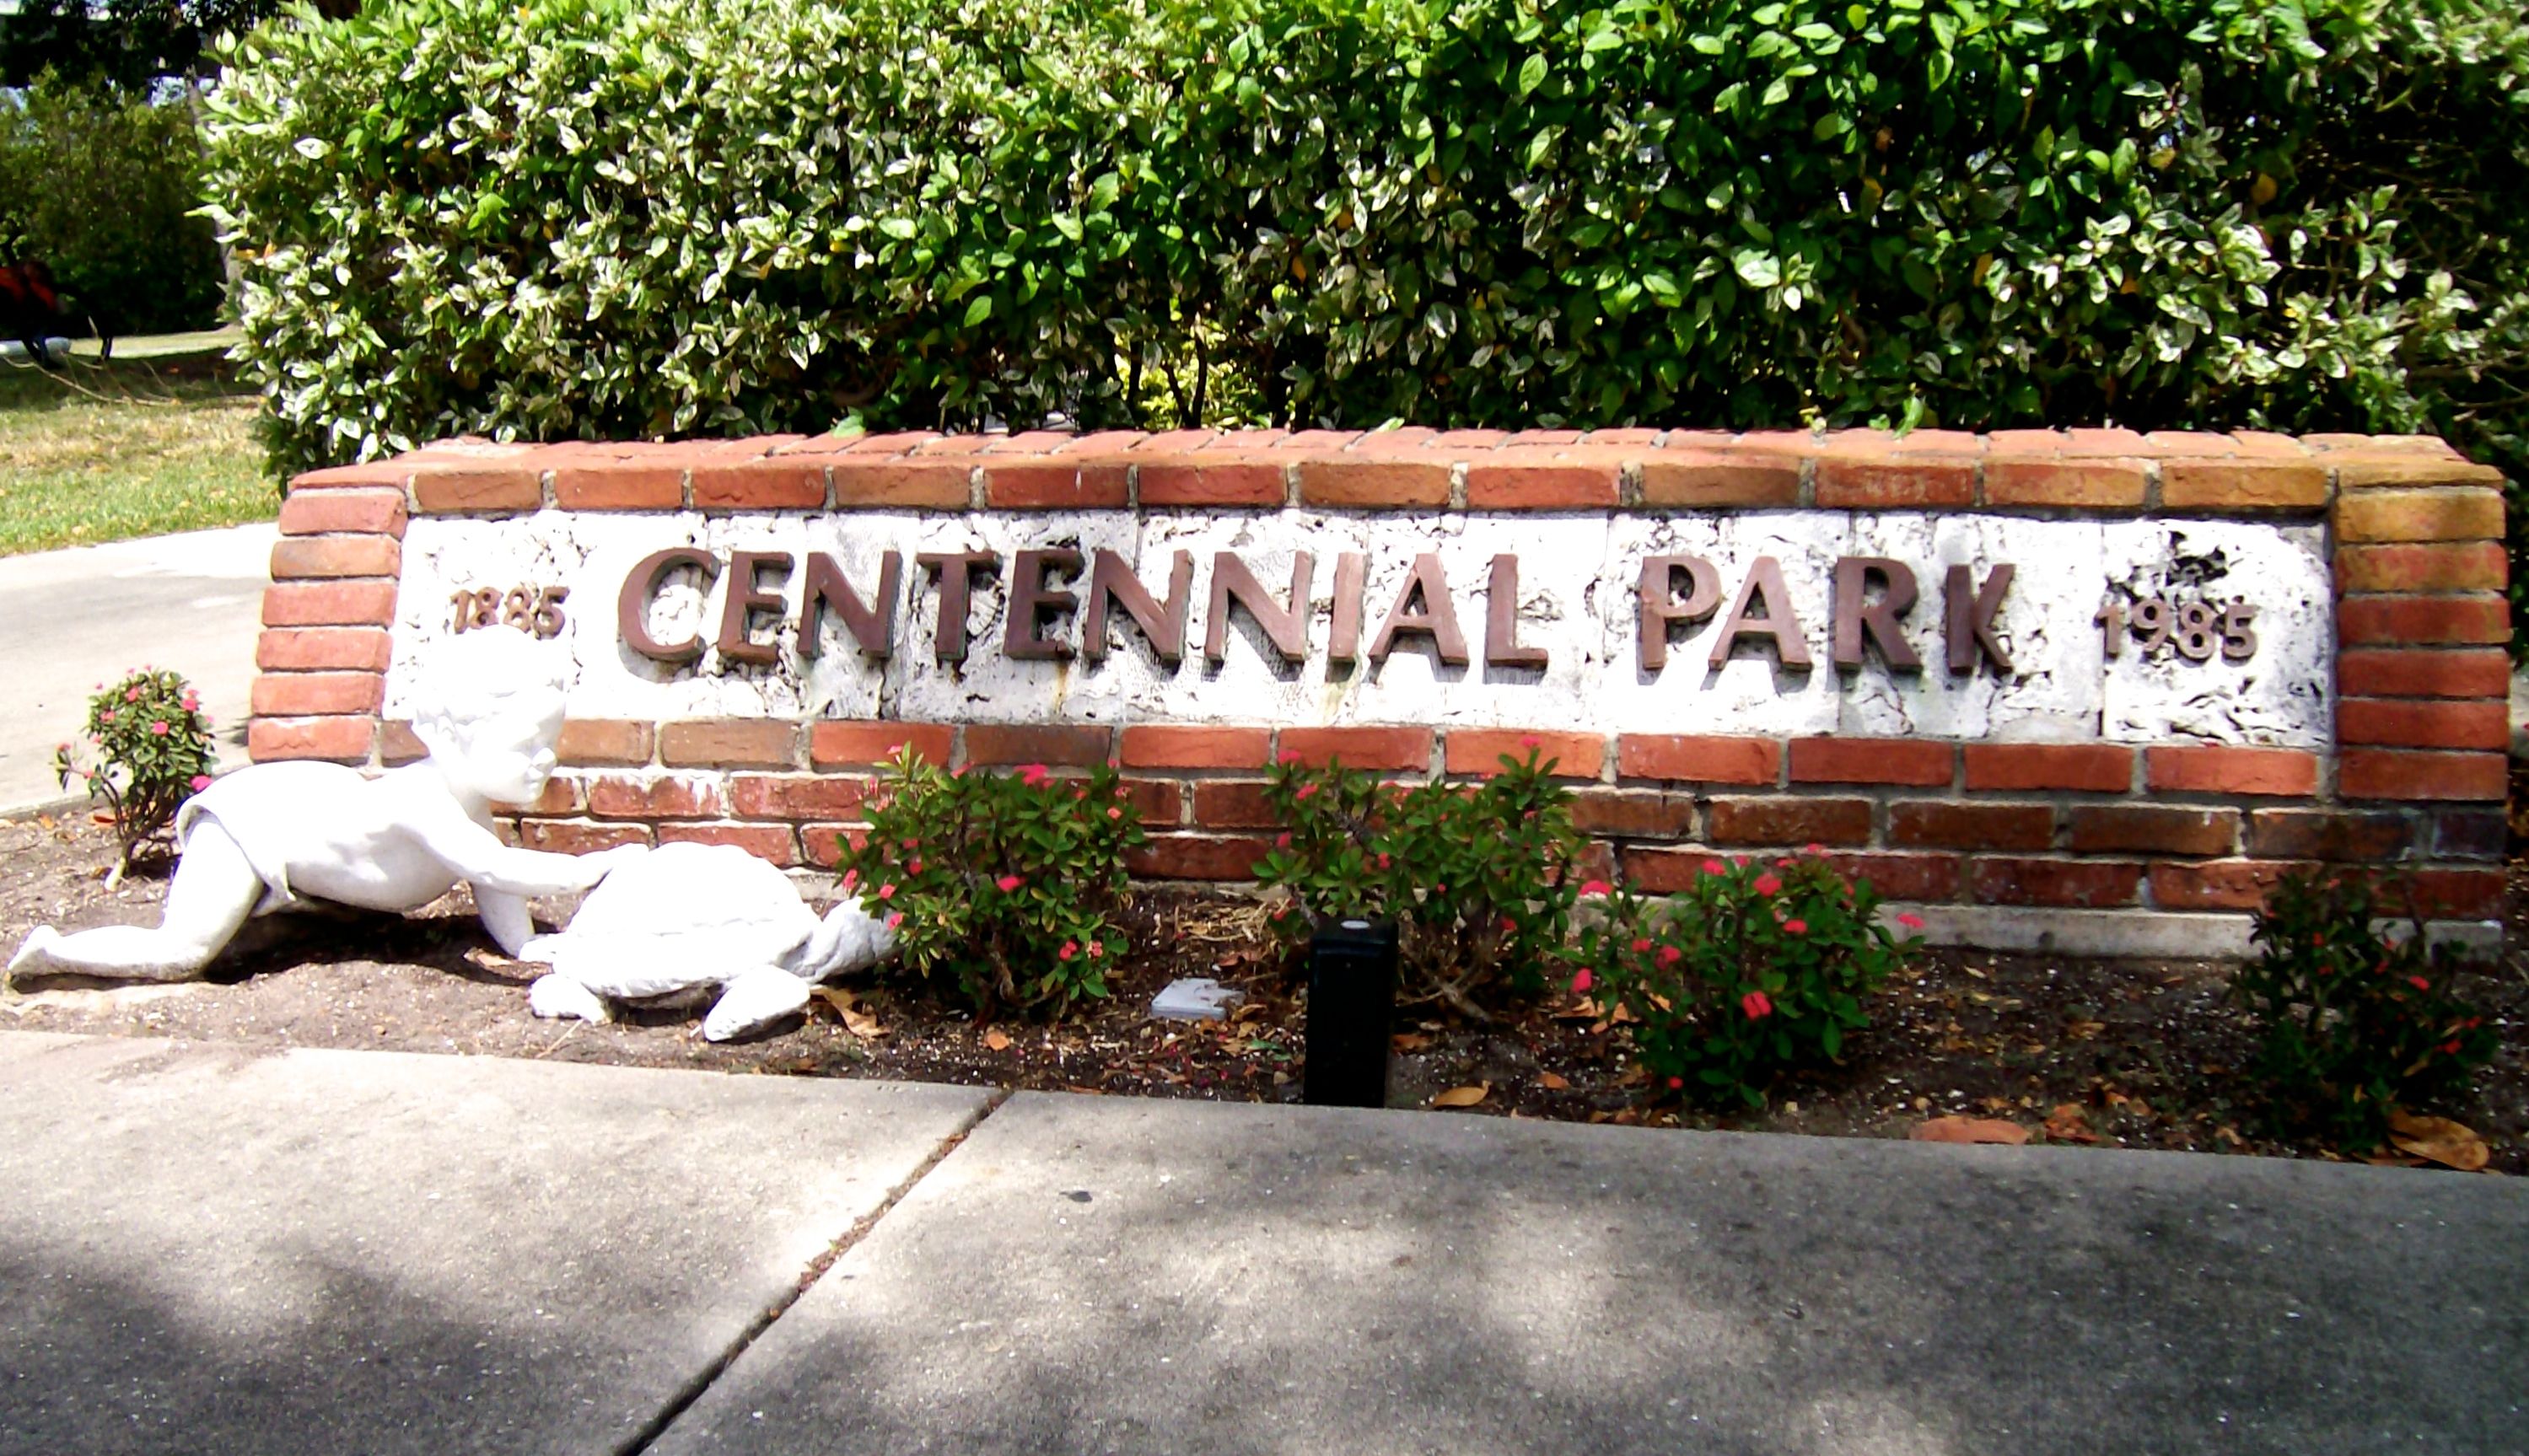 Sign for Centennial Park in Fort Myers, Florida